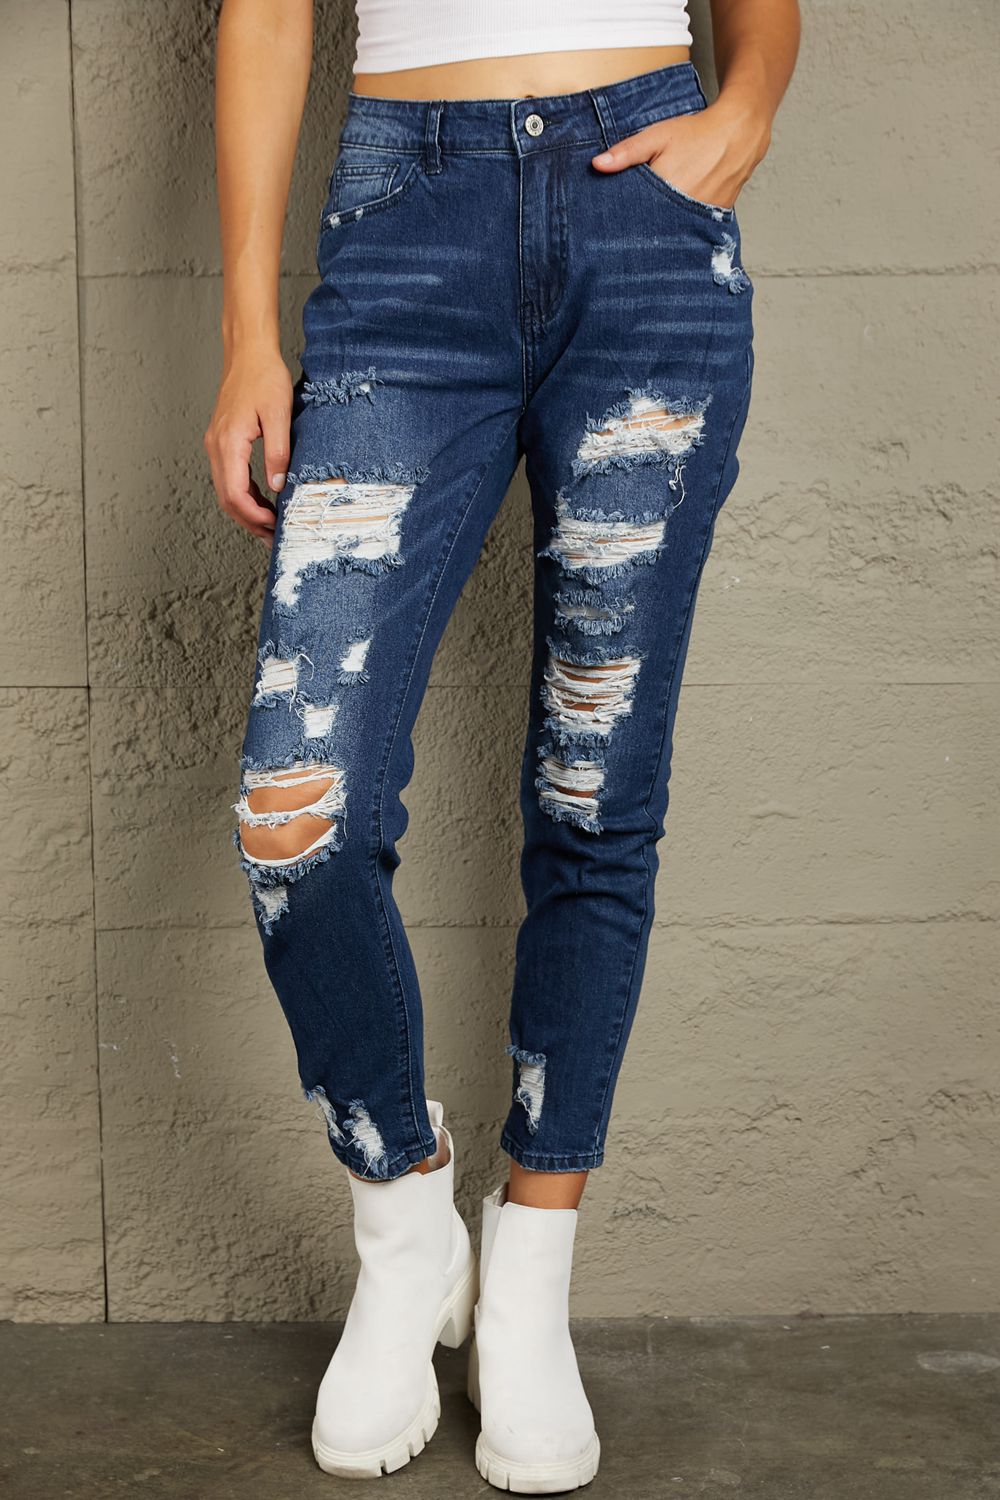 Distressed High Waist Jeans with Pockets - Medium / S - Bottoms - Pants - 1 - 2024